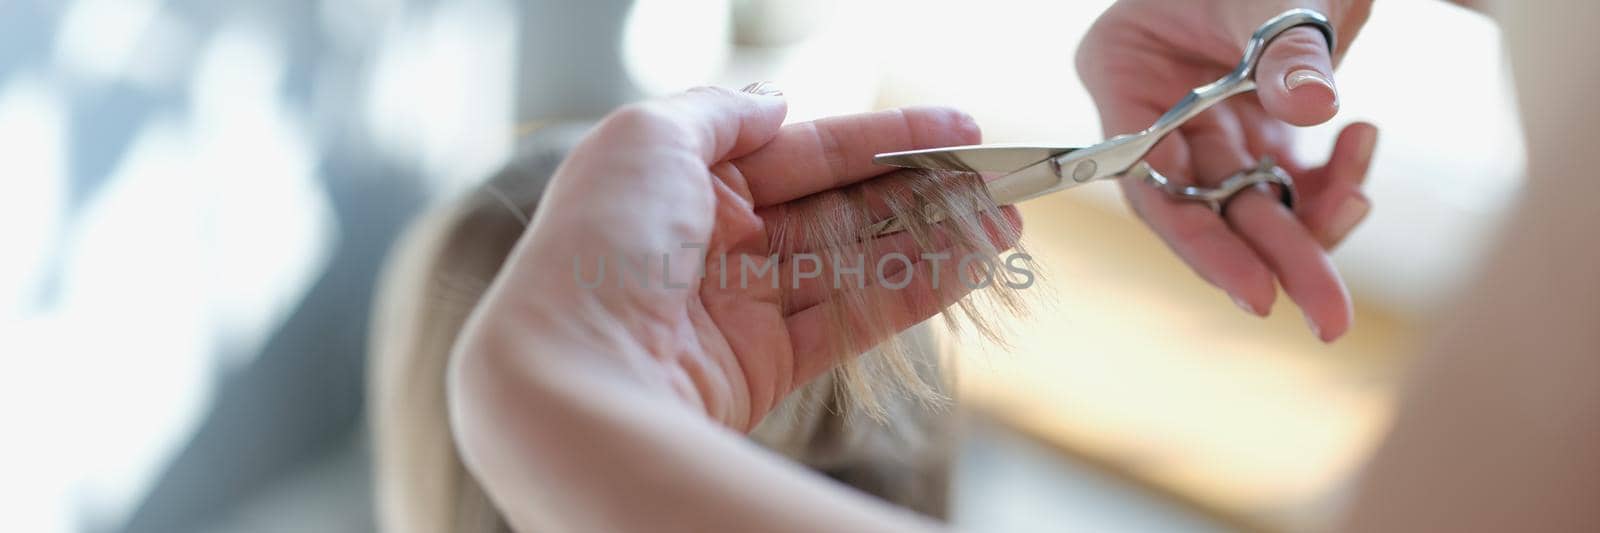 Hairdresser cuts woman's hair with scissors, hand close-up by kuprevich